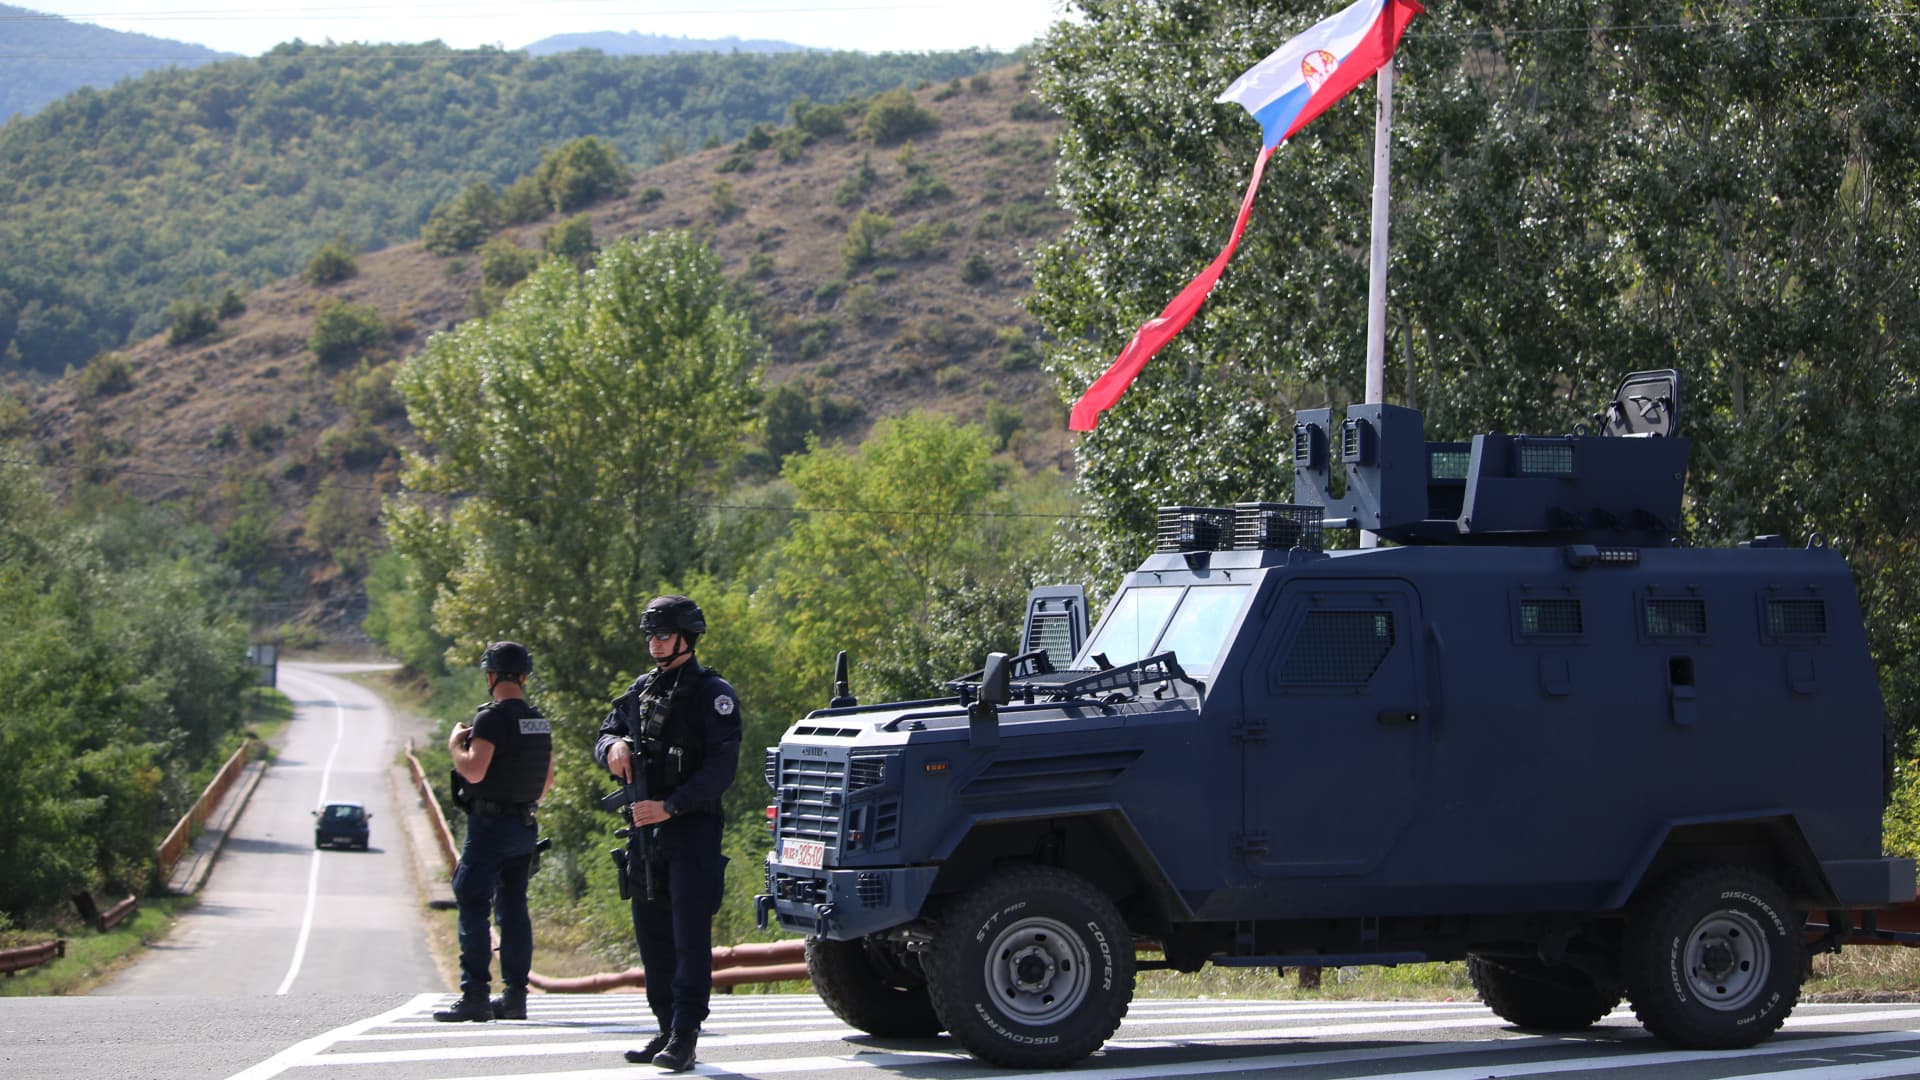 Serbia-Kosovo conflict is at a tipping point after normalization deal